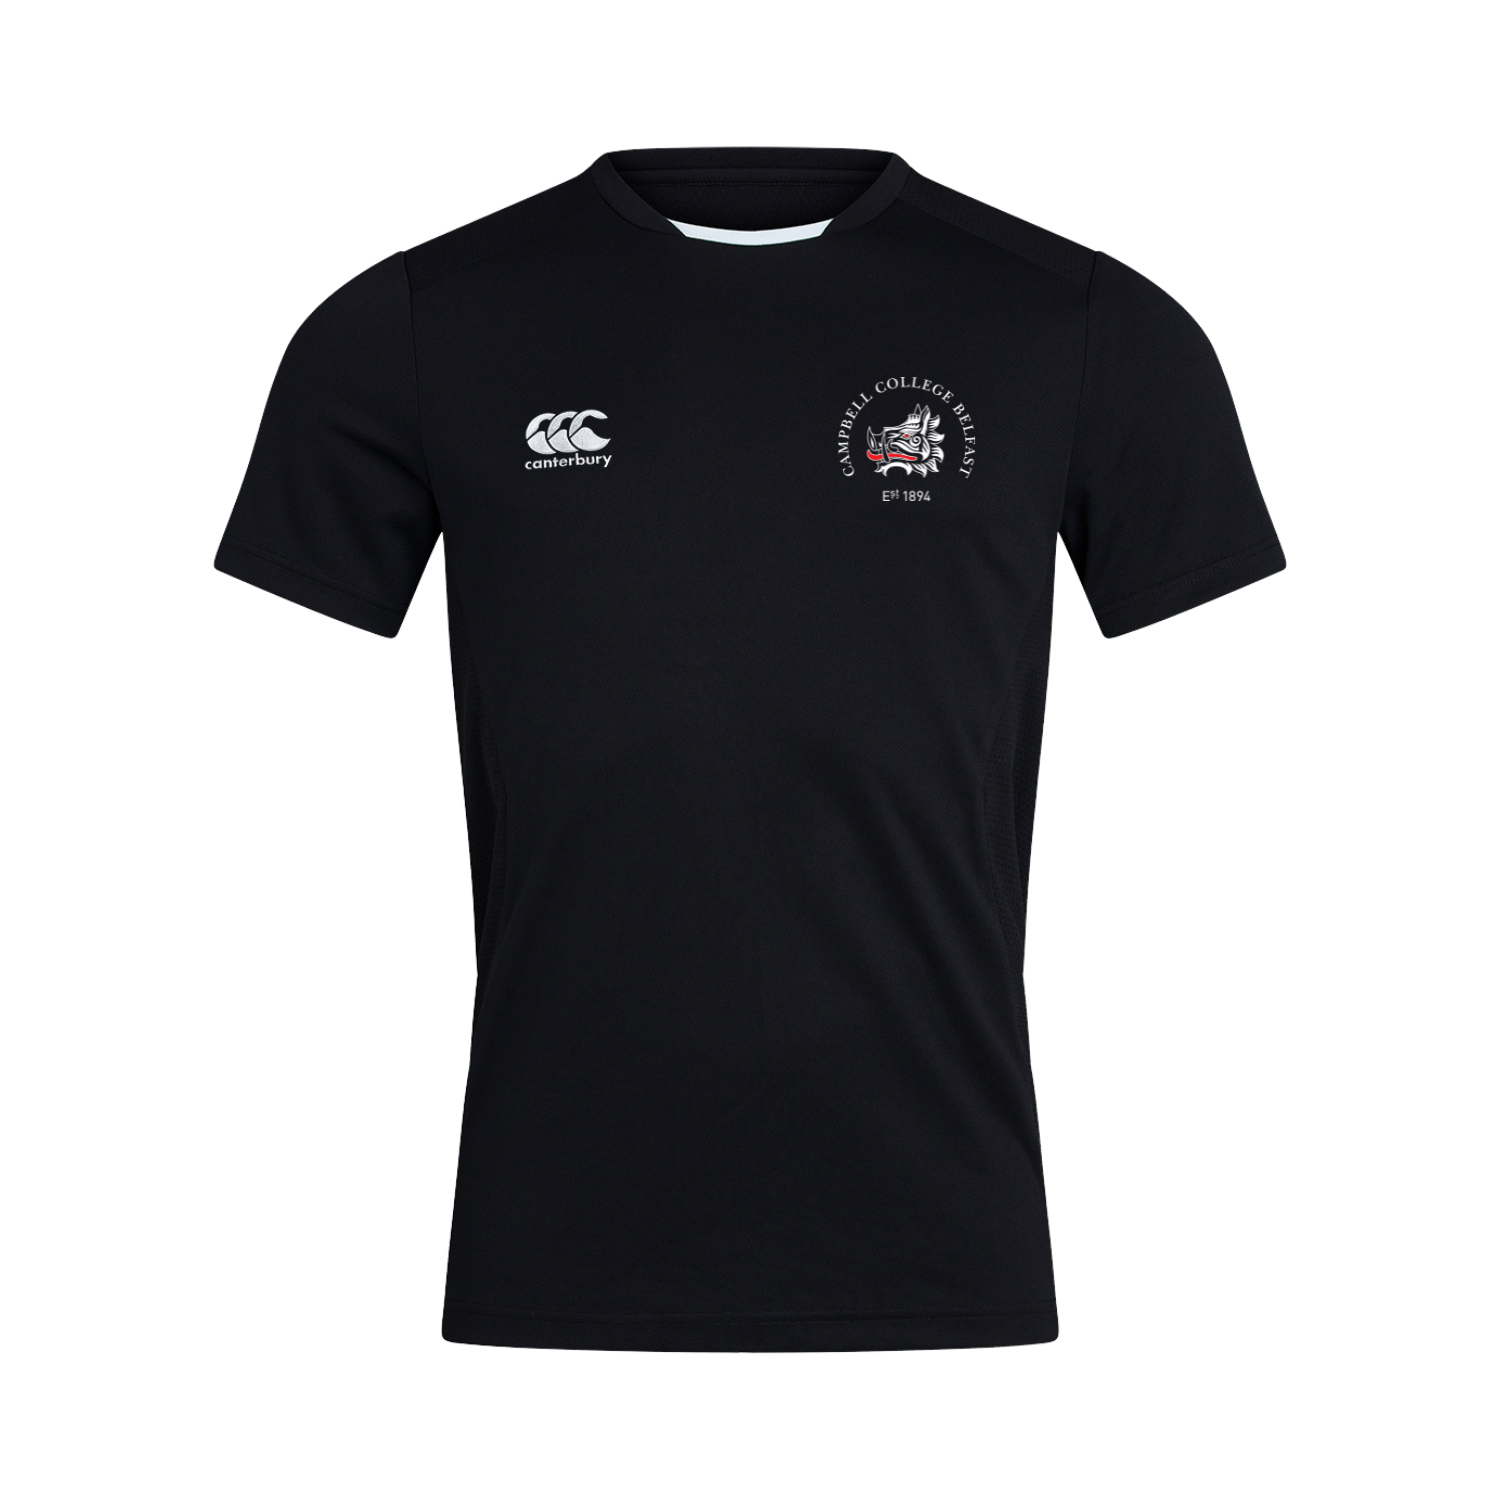 Campbell College - Club Dry Tee - Black